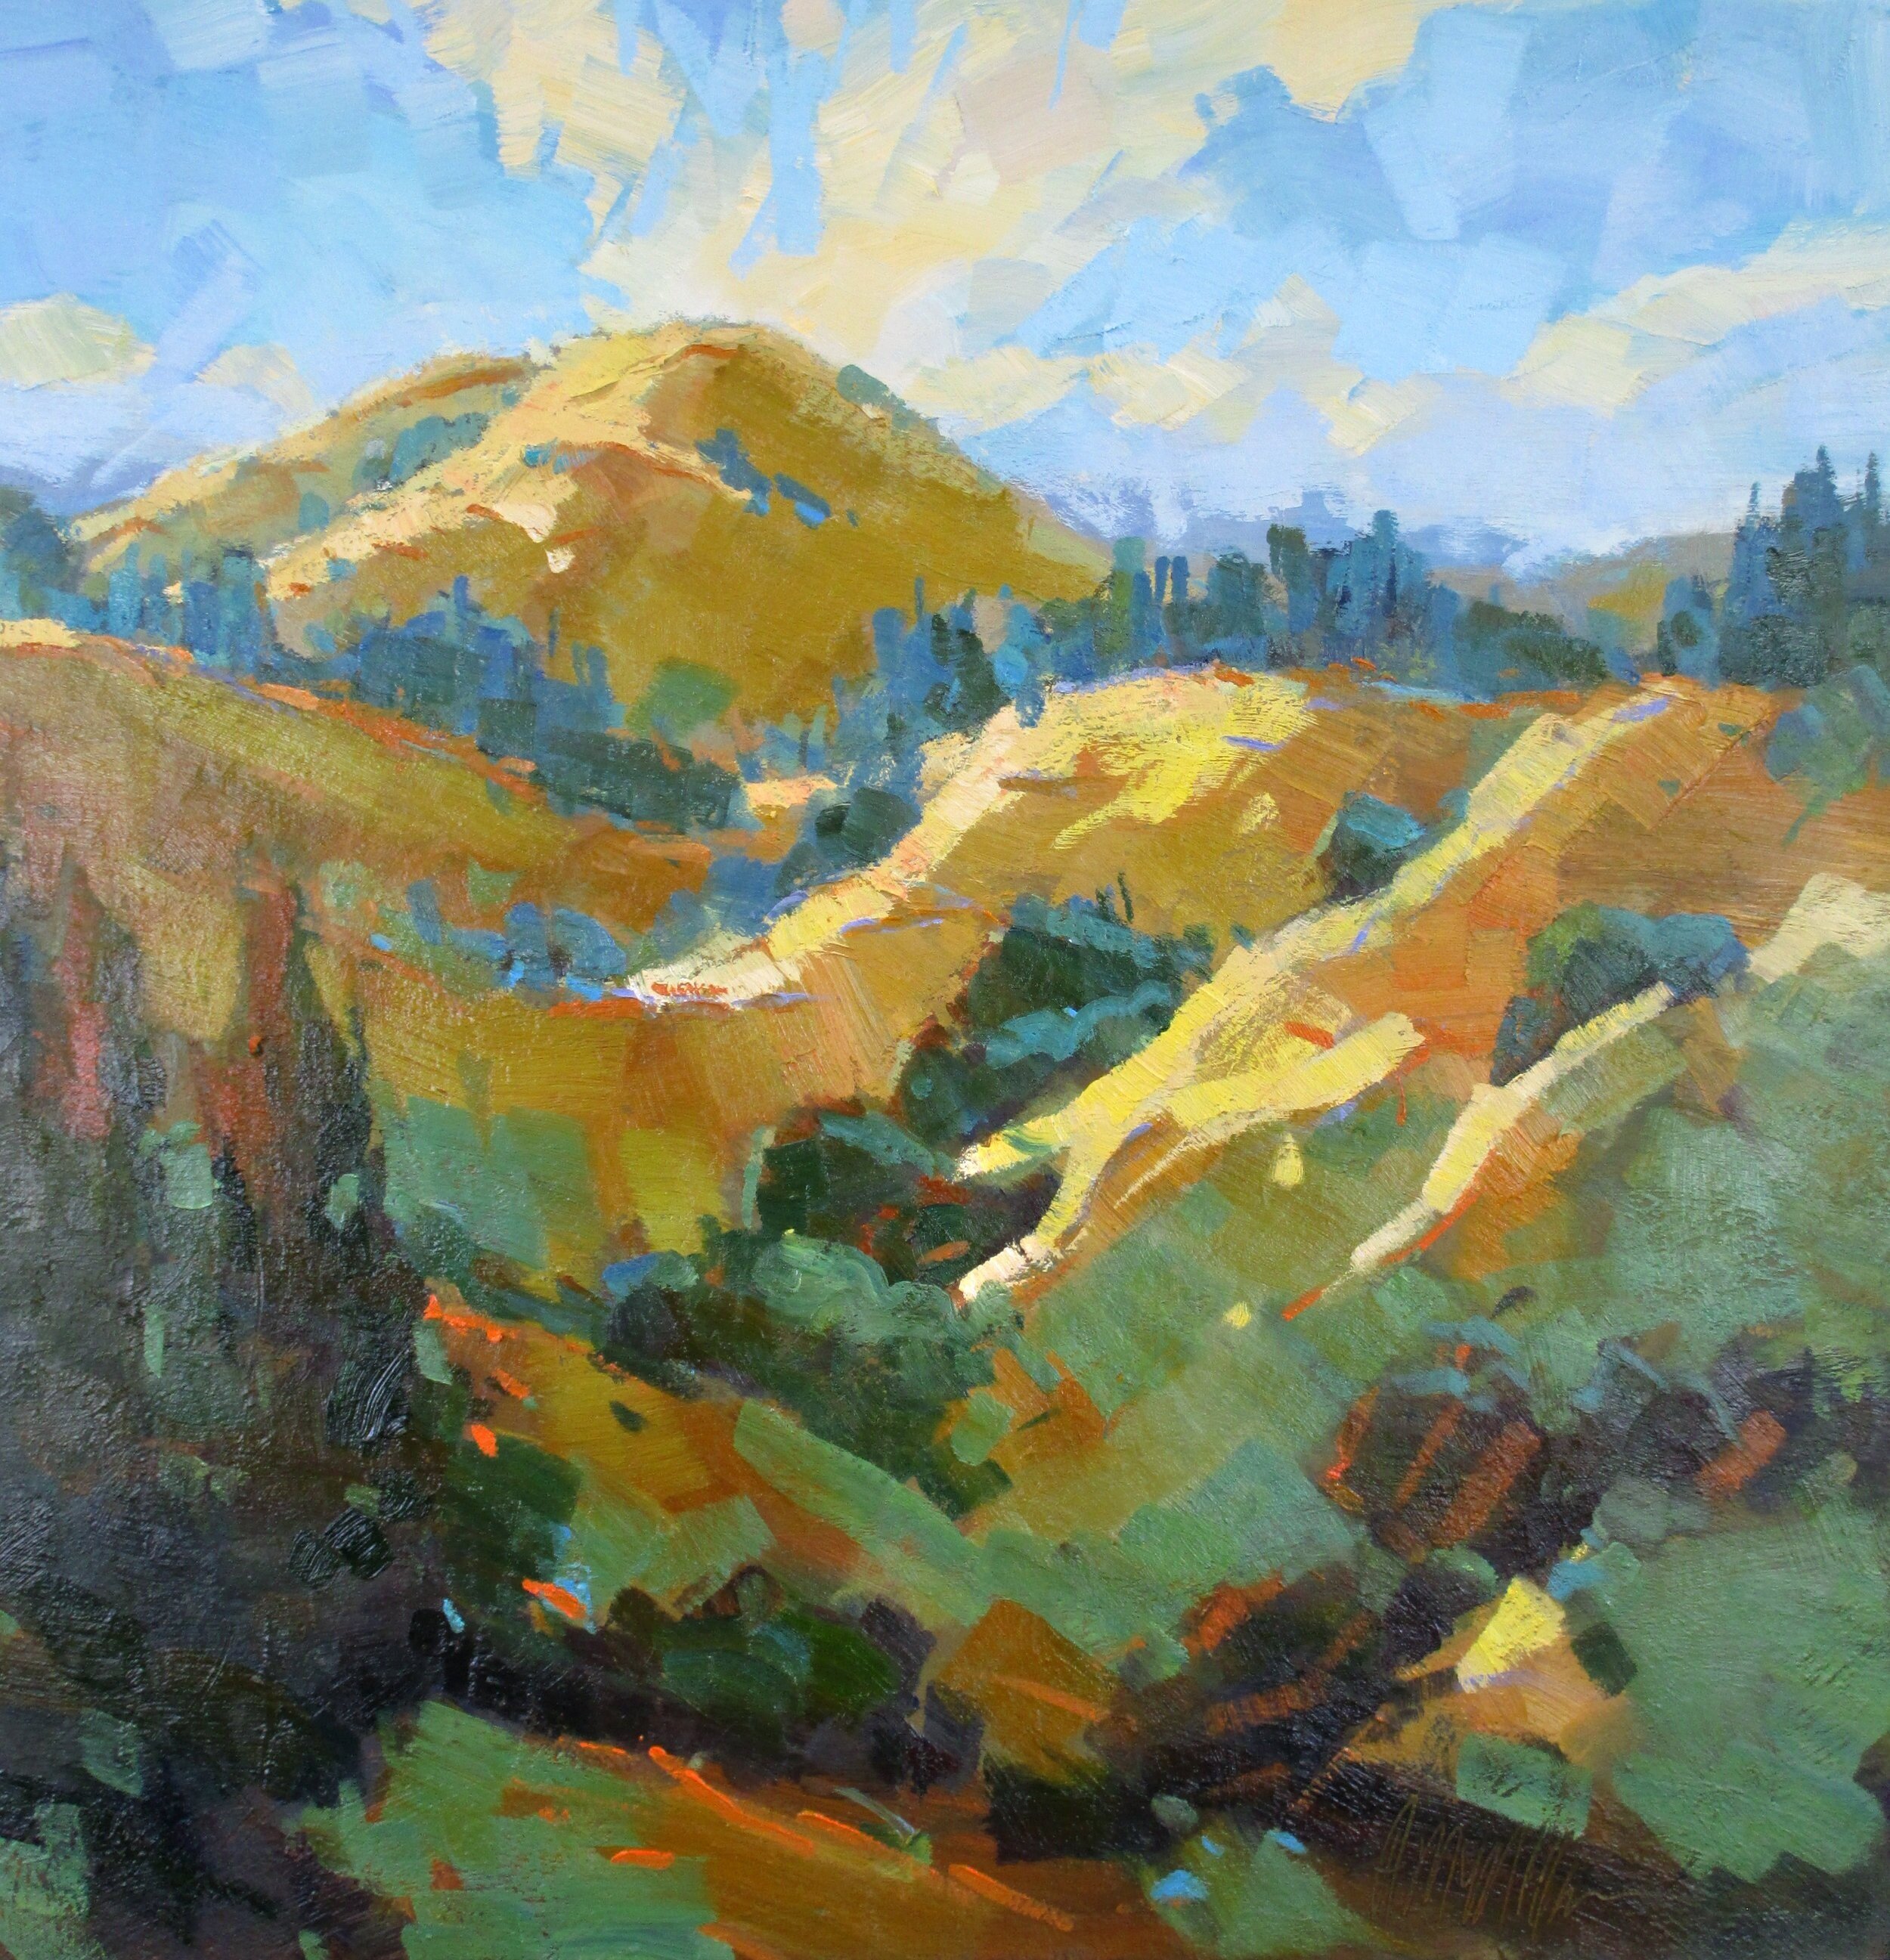 Windy Hill in the Sun, 30 x 30 inches, oil. Sold.